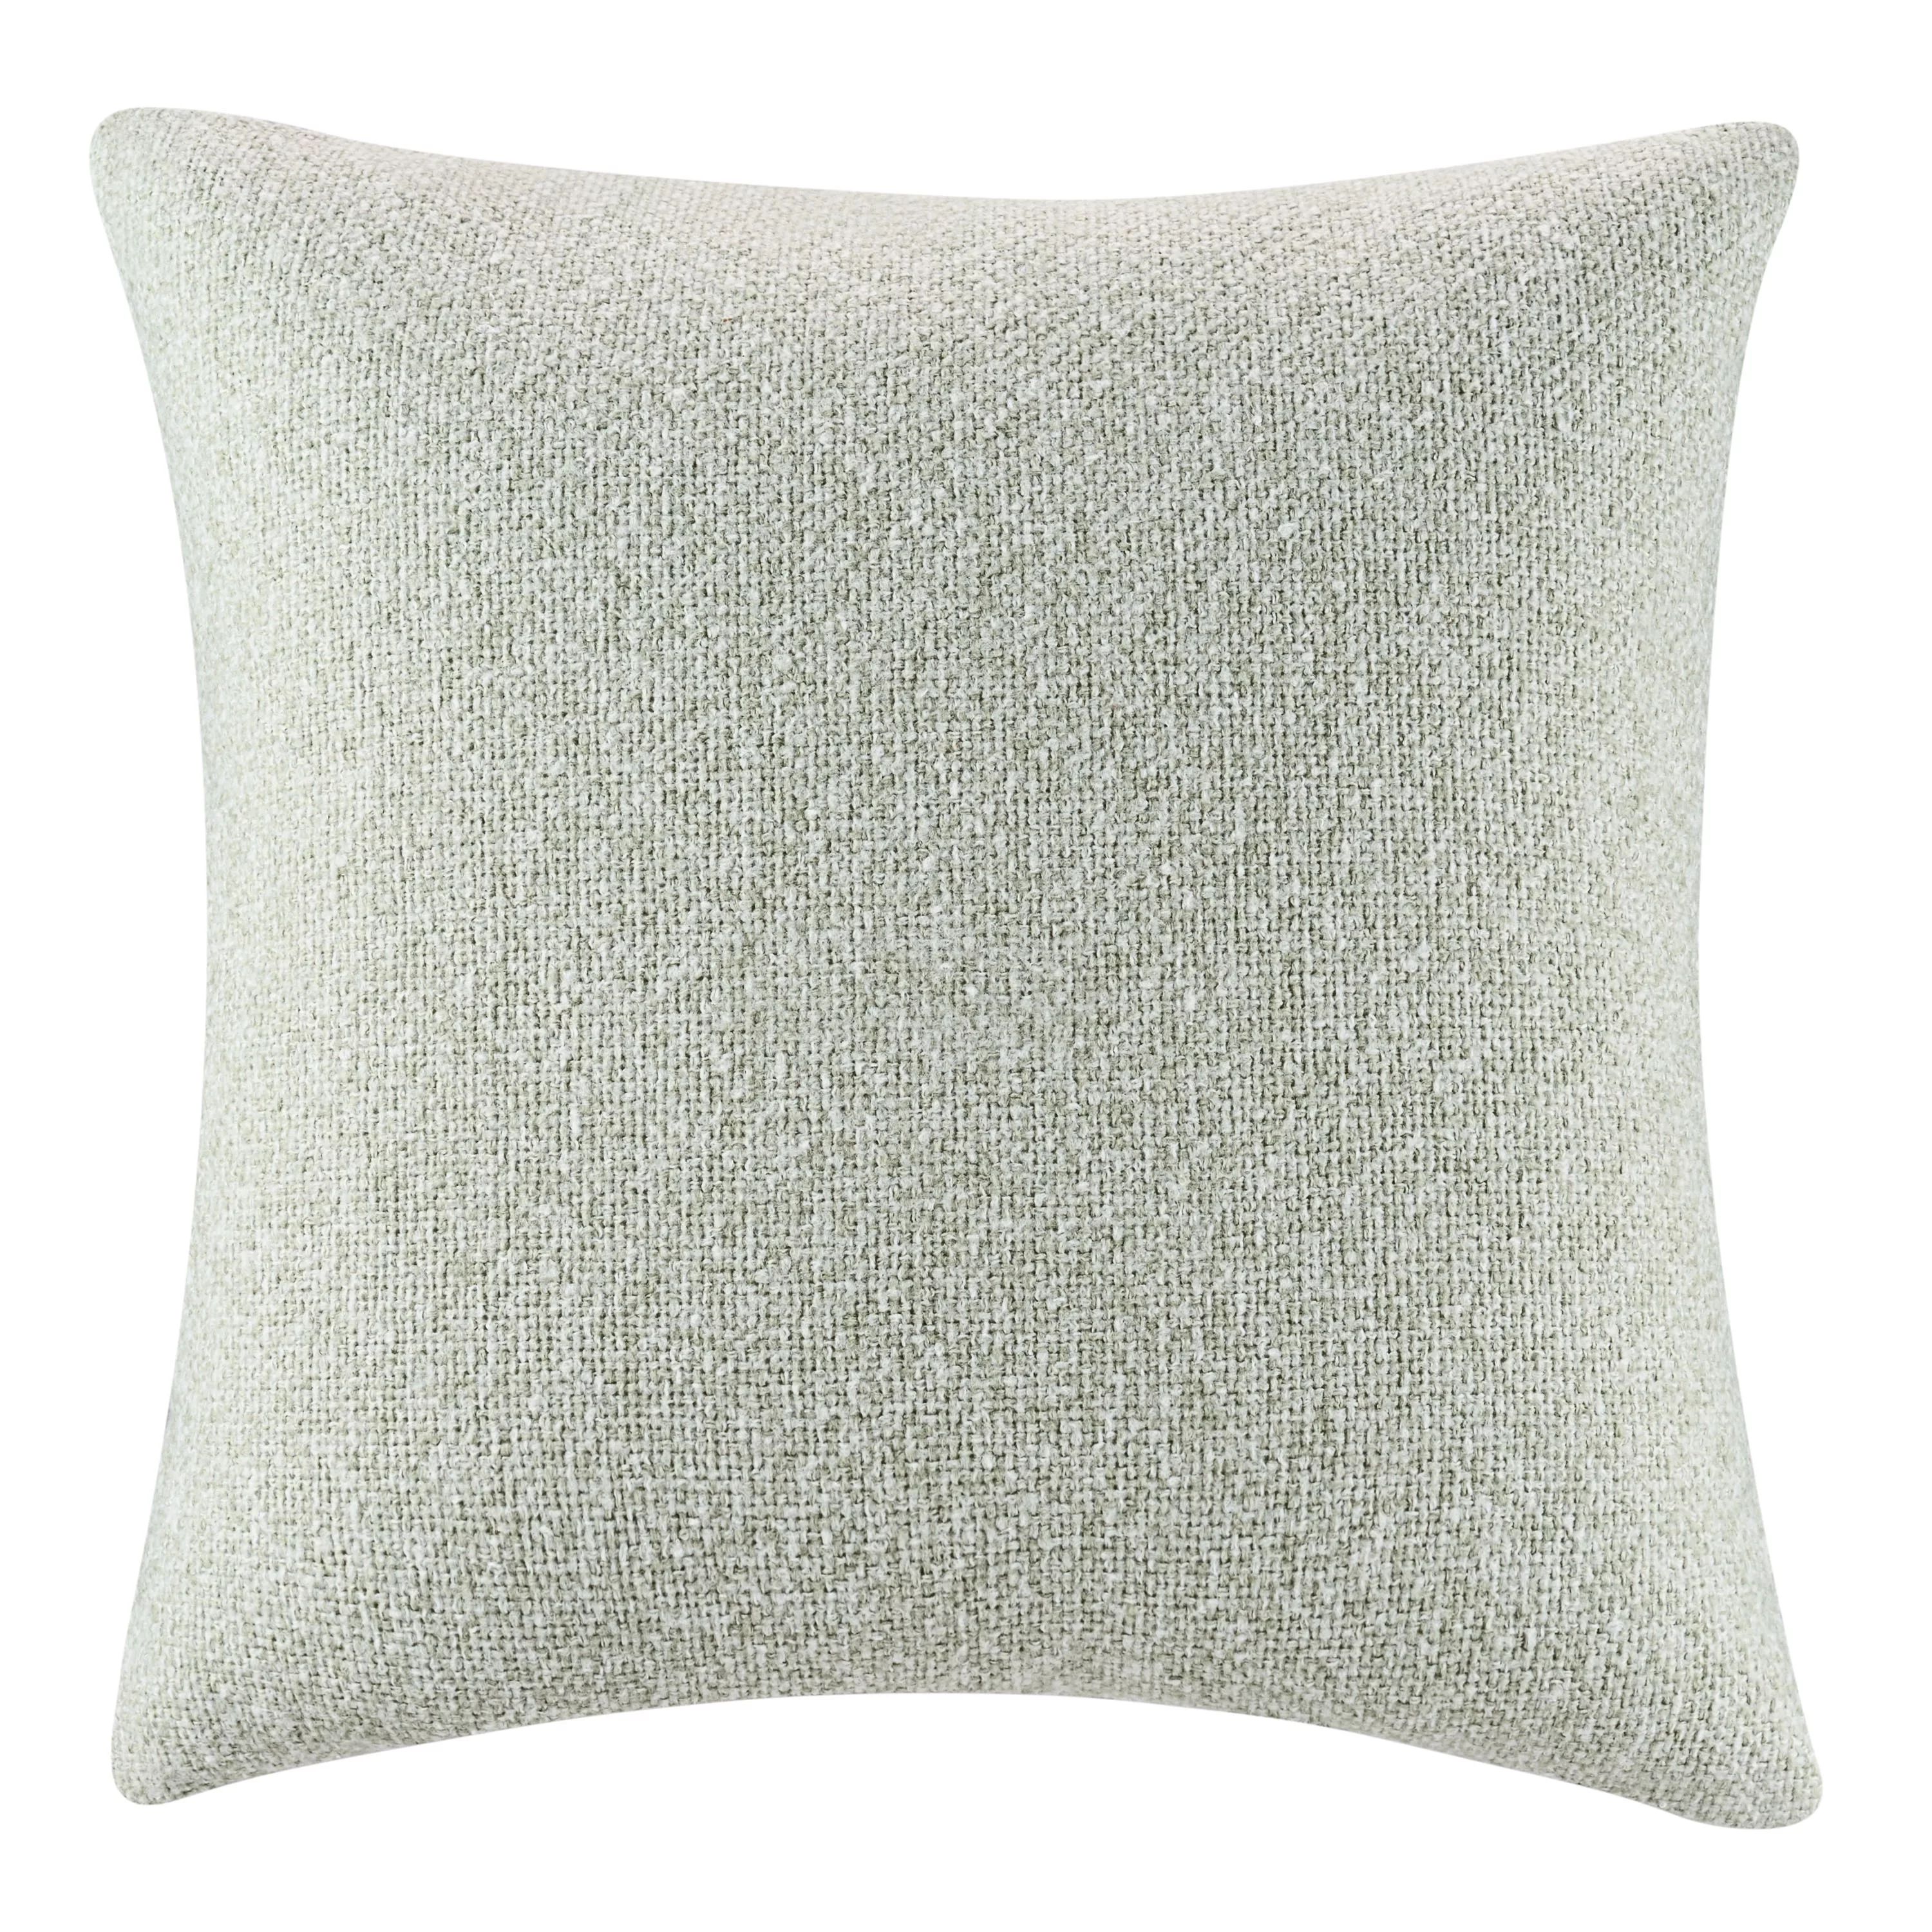 Beautiful Decorative Boucle Pillow, Sage Green, 20 x 20 inches, by Drew Barrymore | Walmart (US)